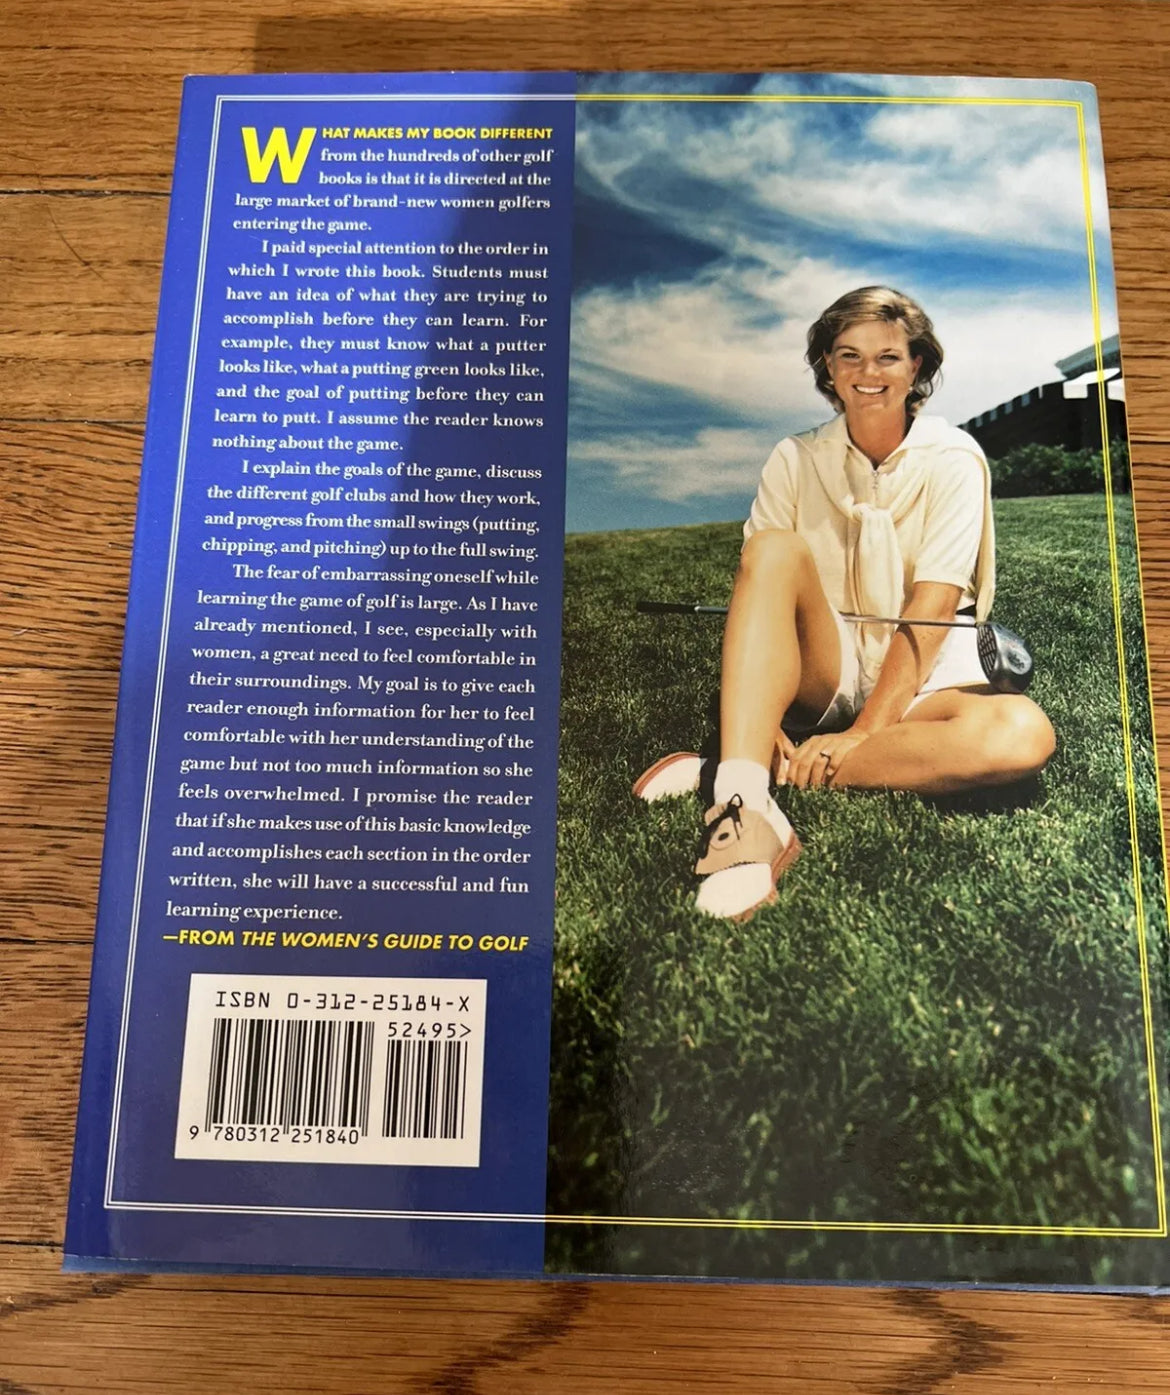 The Women's Guide to Golf : A Handbook for Beginners by Kellie Stenzel